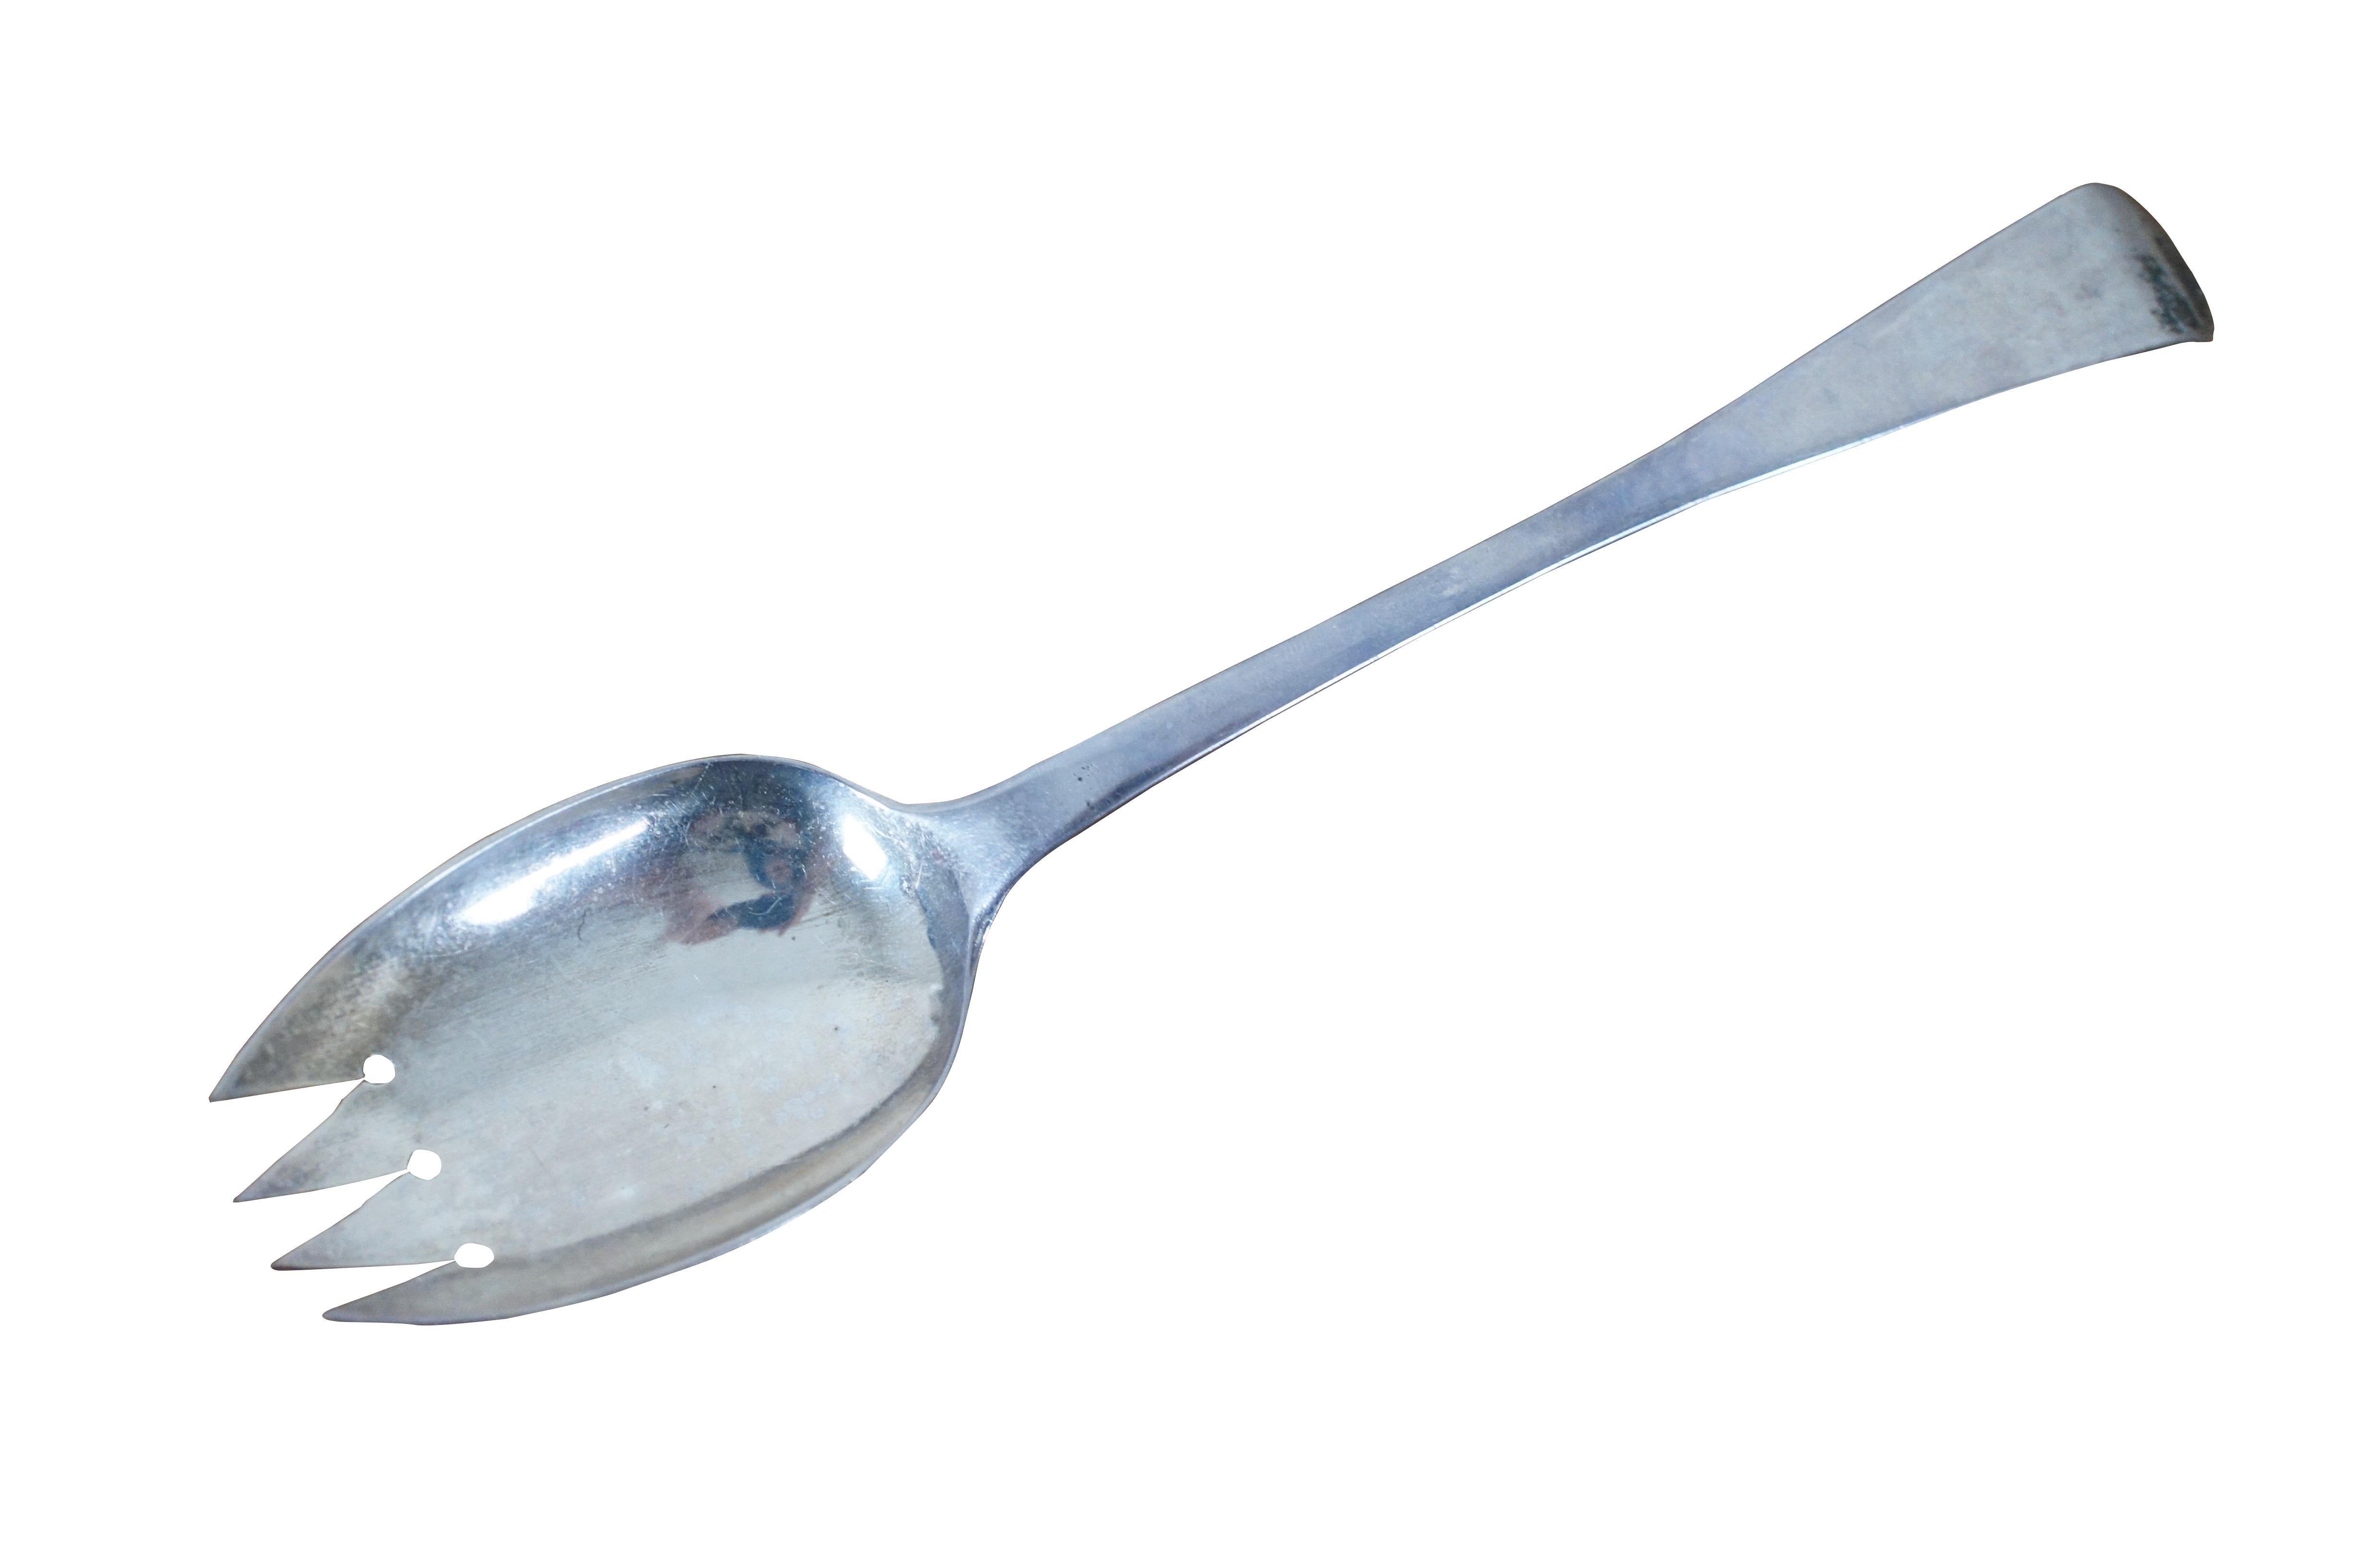 Antique English Georgian sterling silver “spork” shaped serving spoon or salad tosser tong. Attributed to H-H (Henry Holland) or H-J Henry Jeffreys, circa 1780s - 1830s, London England silversmiths.

Measures: 8.25” x 1.75” (length x width) /